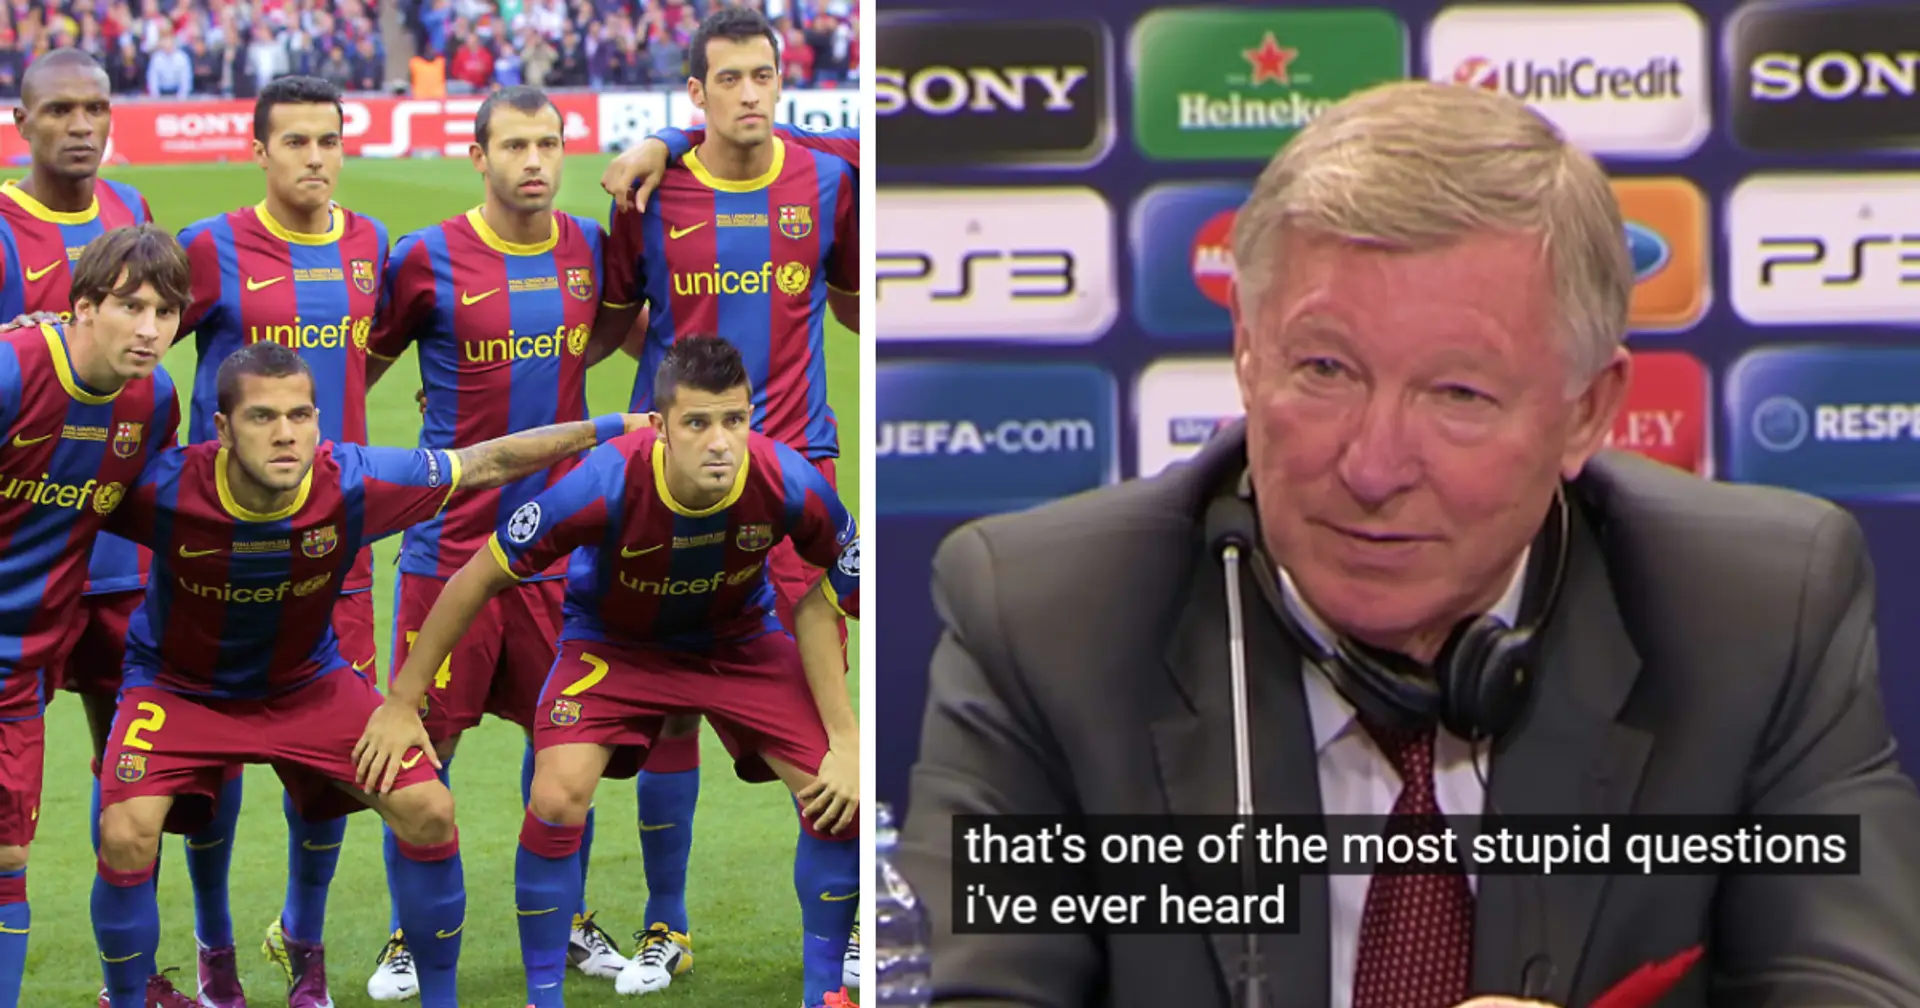 'One of the most stupid questions': One prime-Barca player Sir Alex Ferguson said he'd sign for United - not Messi